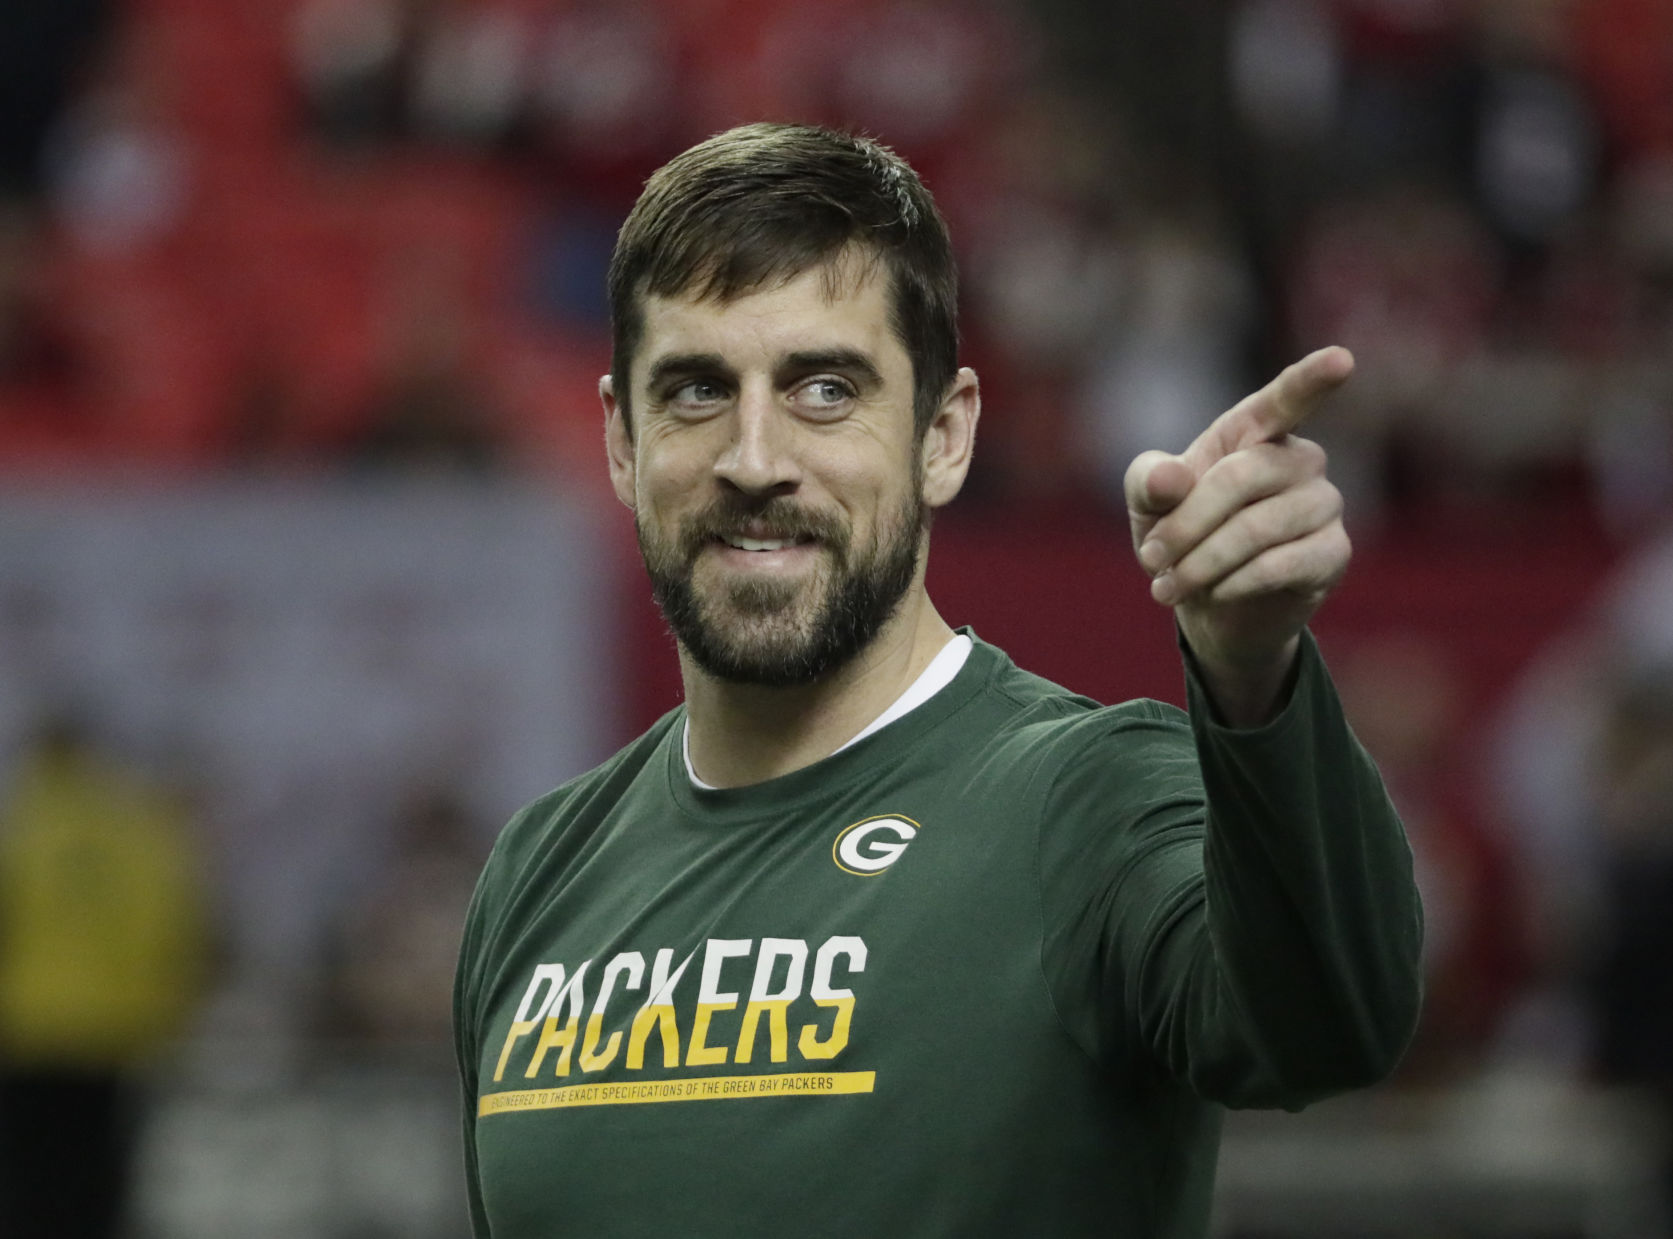 aaron rodgers stats playoffs